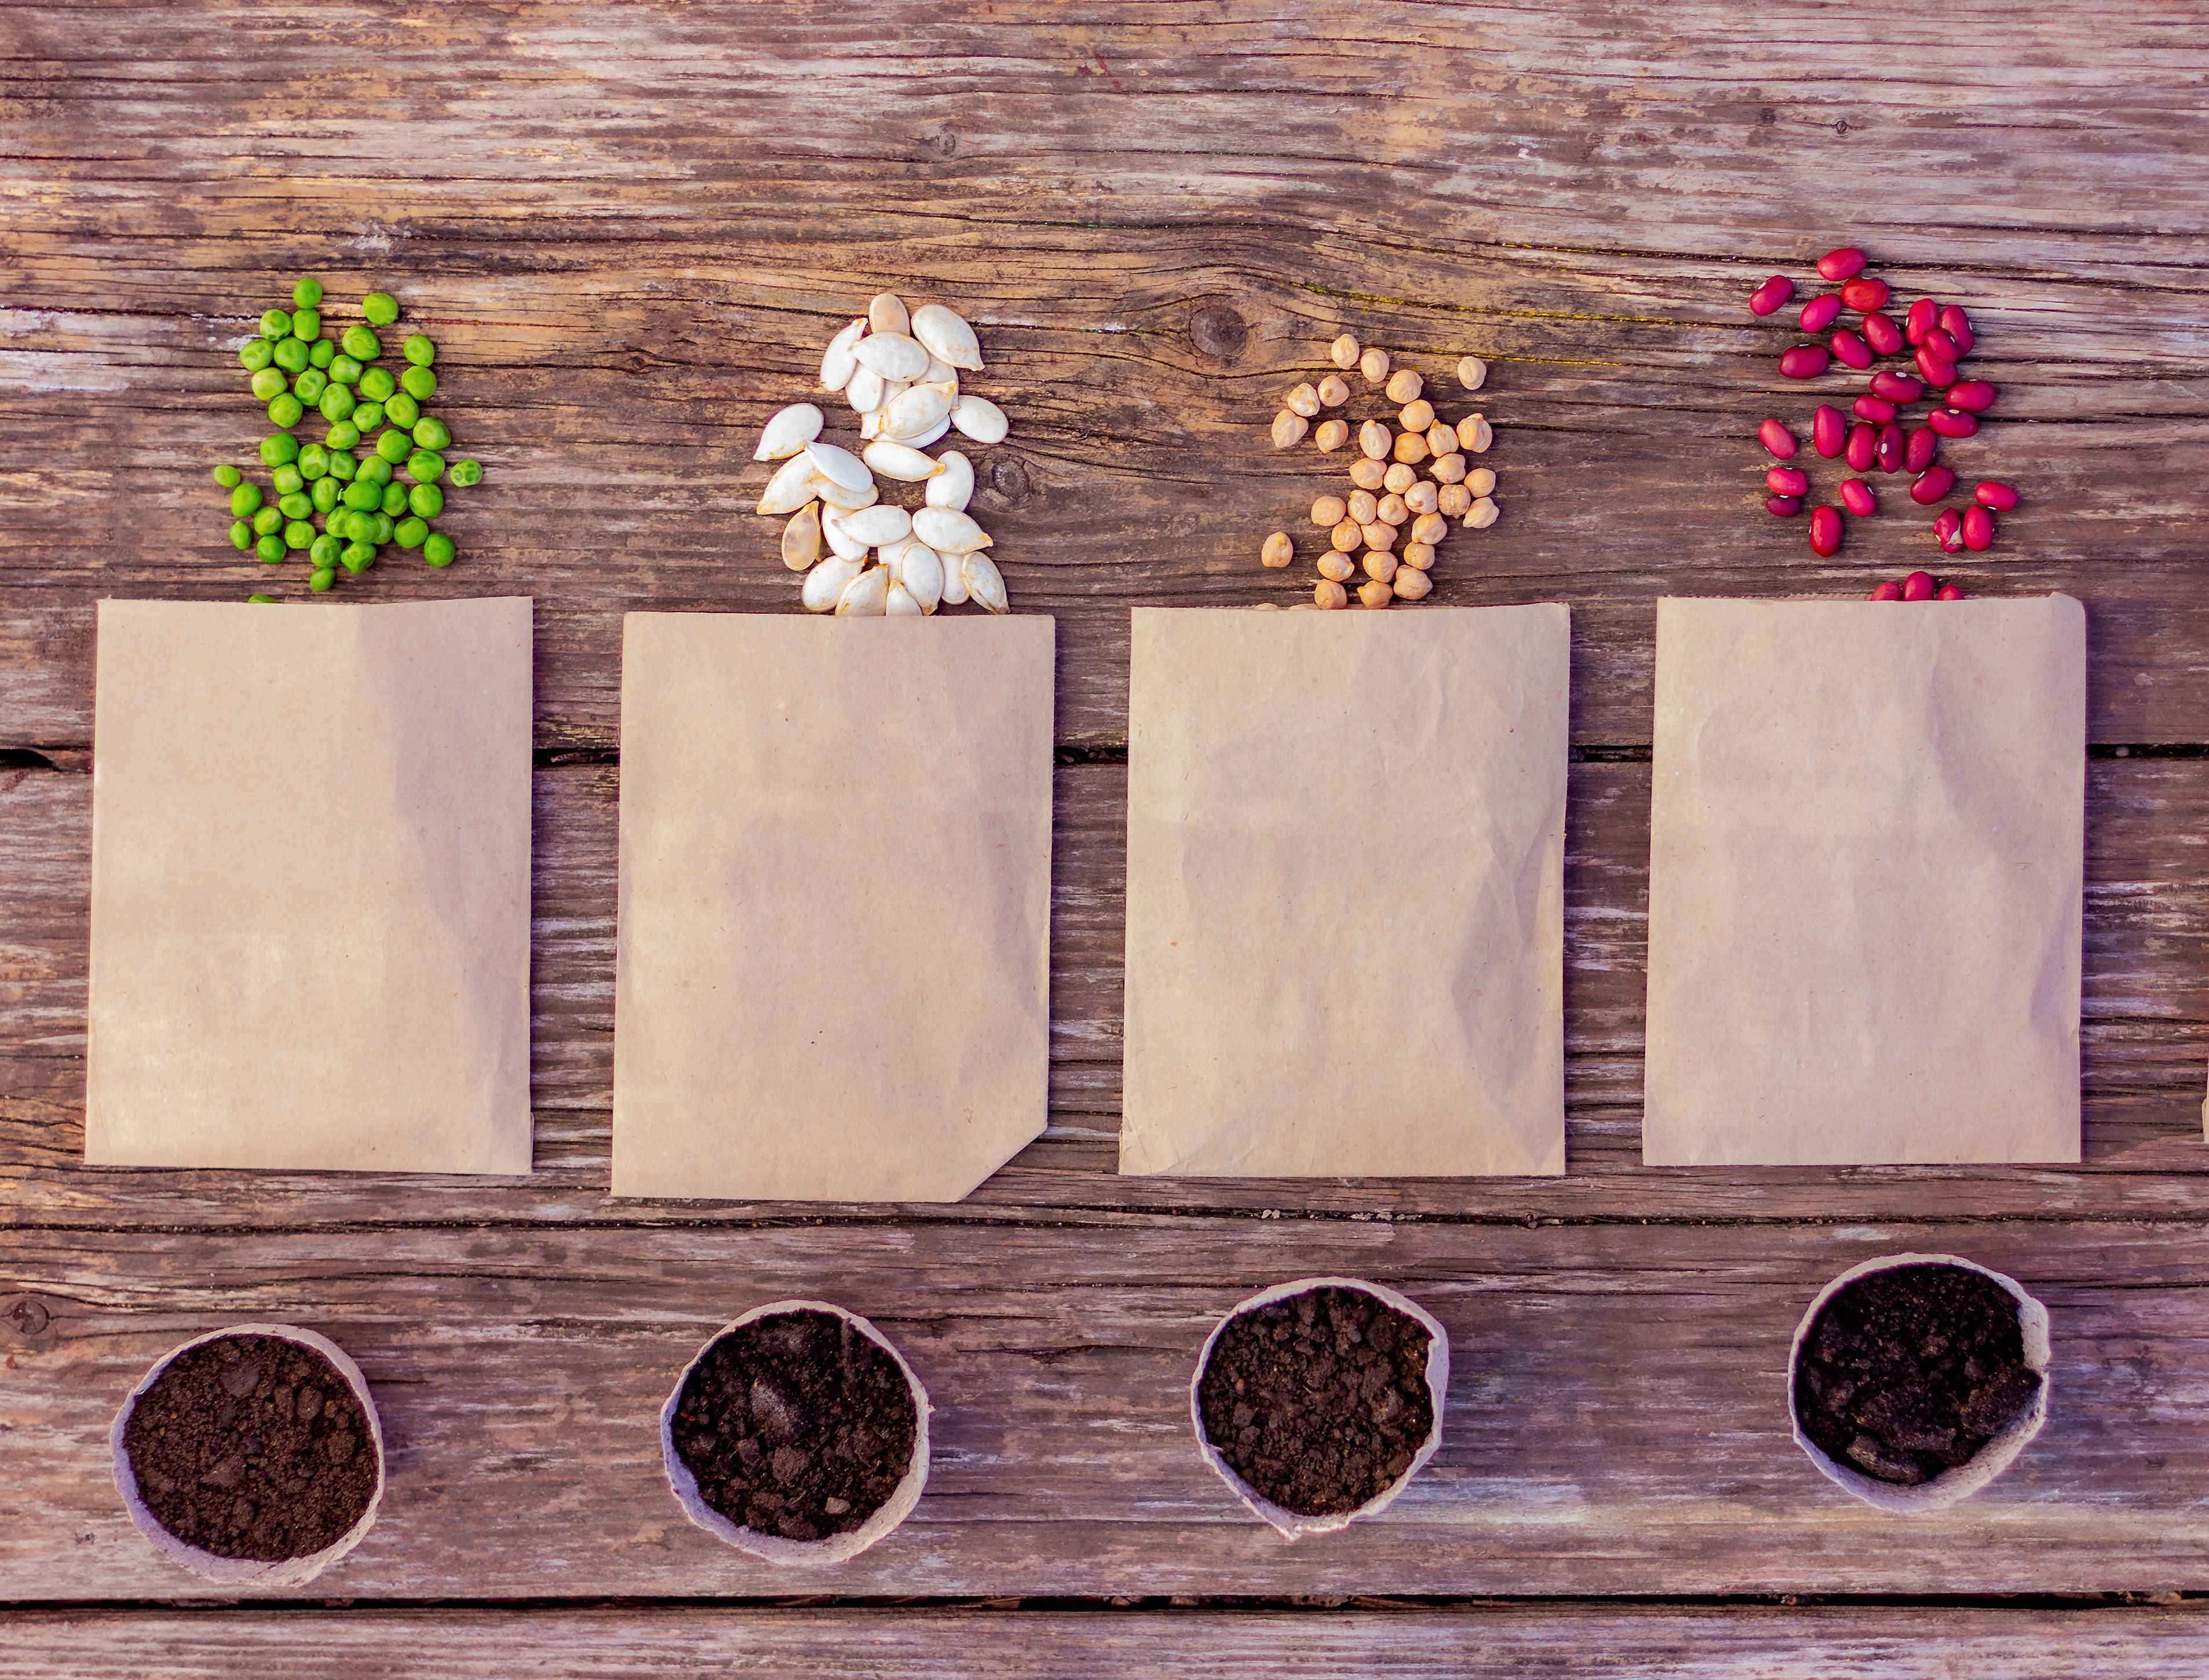 Seed packets make thoughtful Easter gifts for friends and family members.